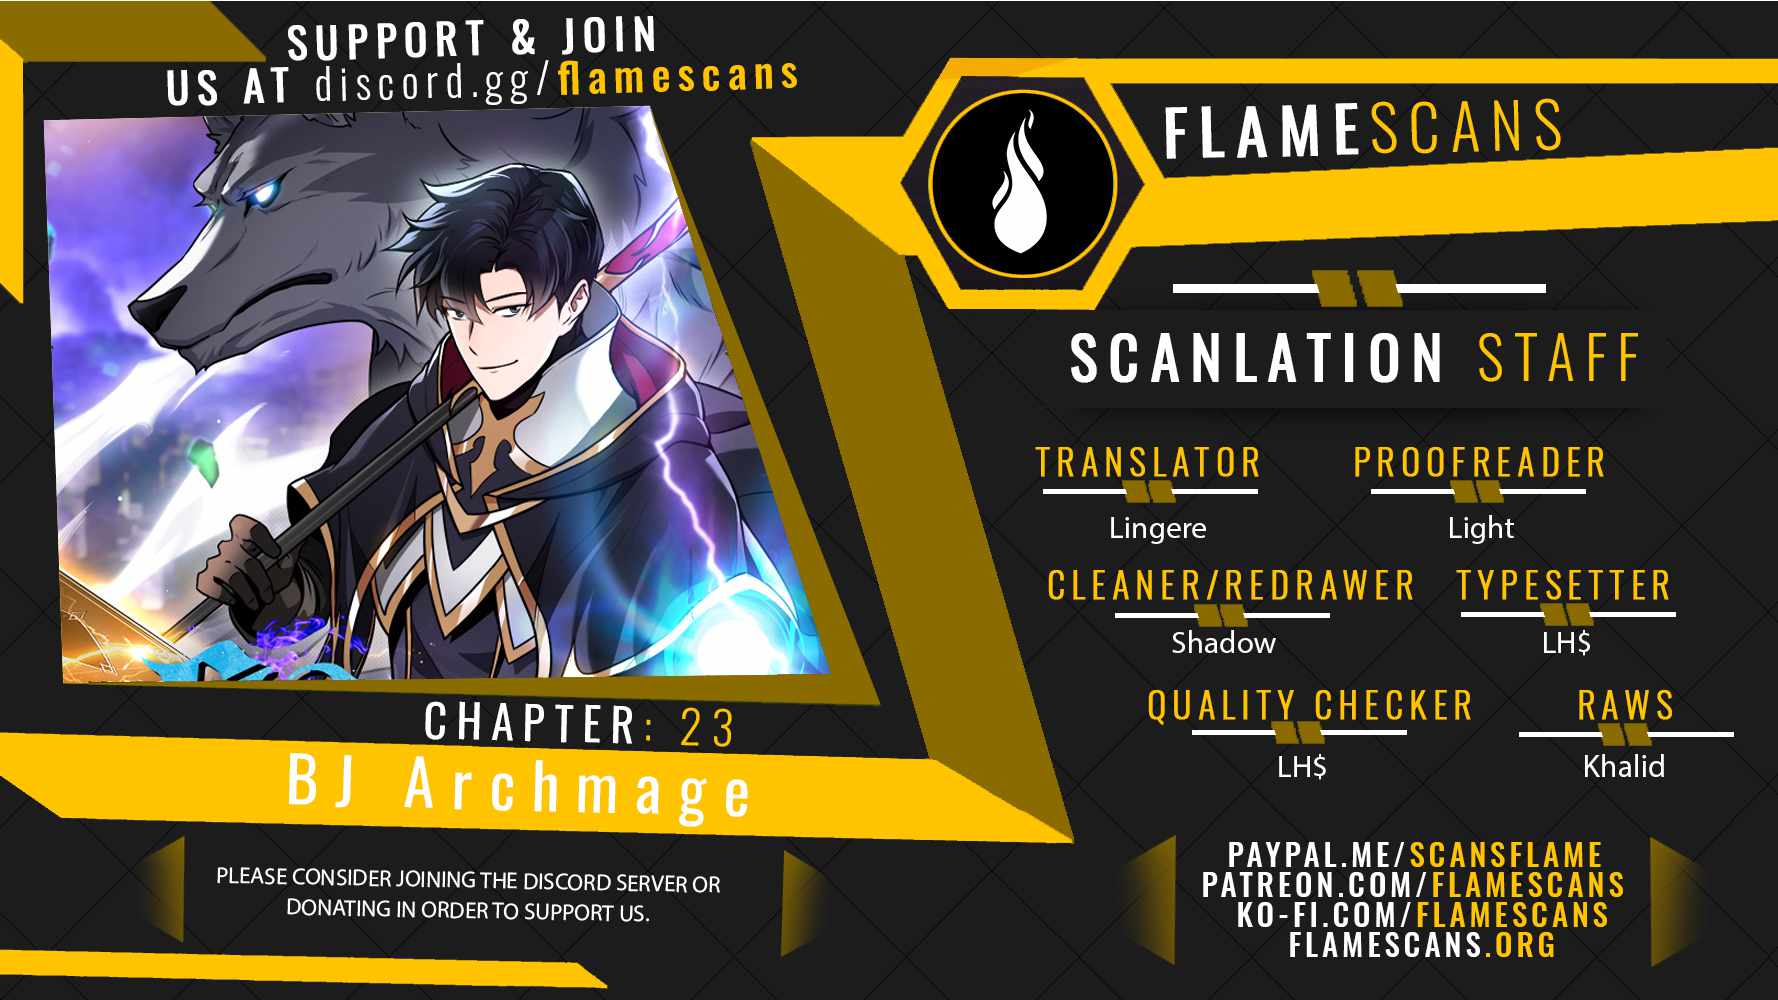 Archmage Streamer chapter 23